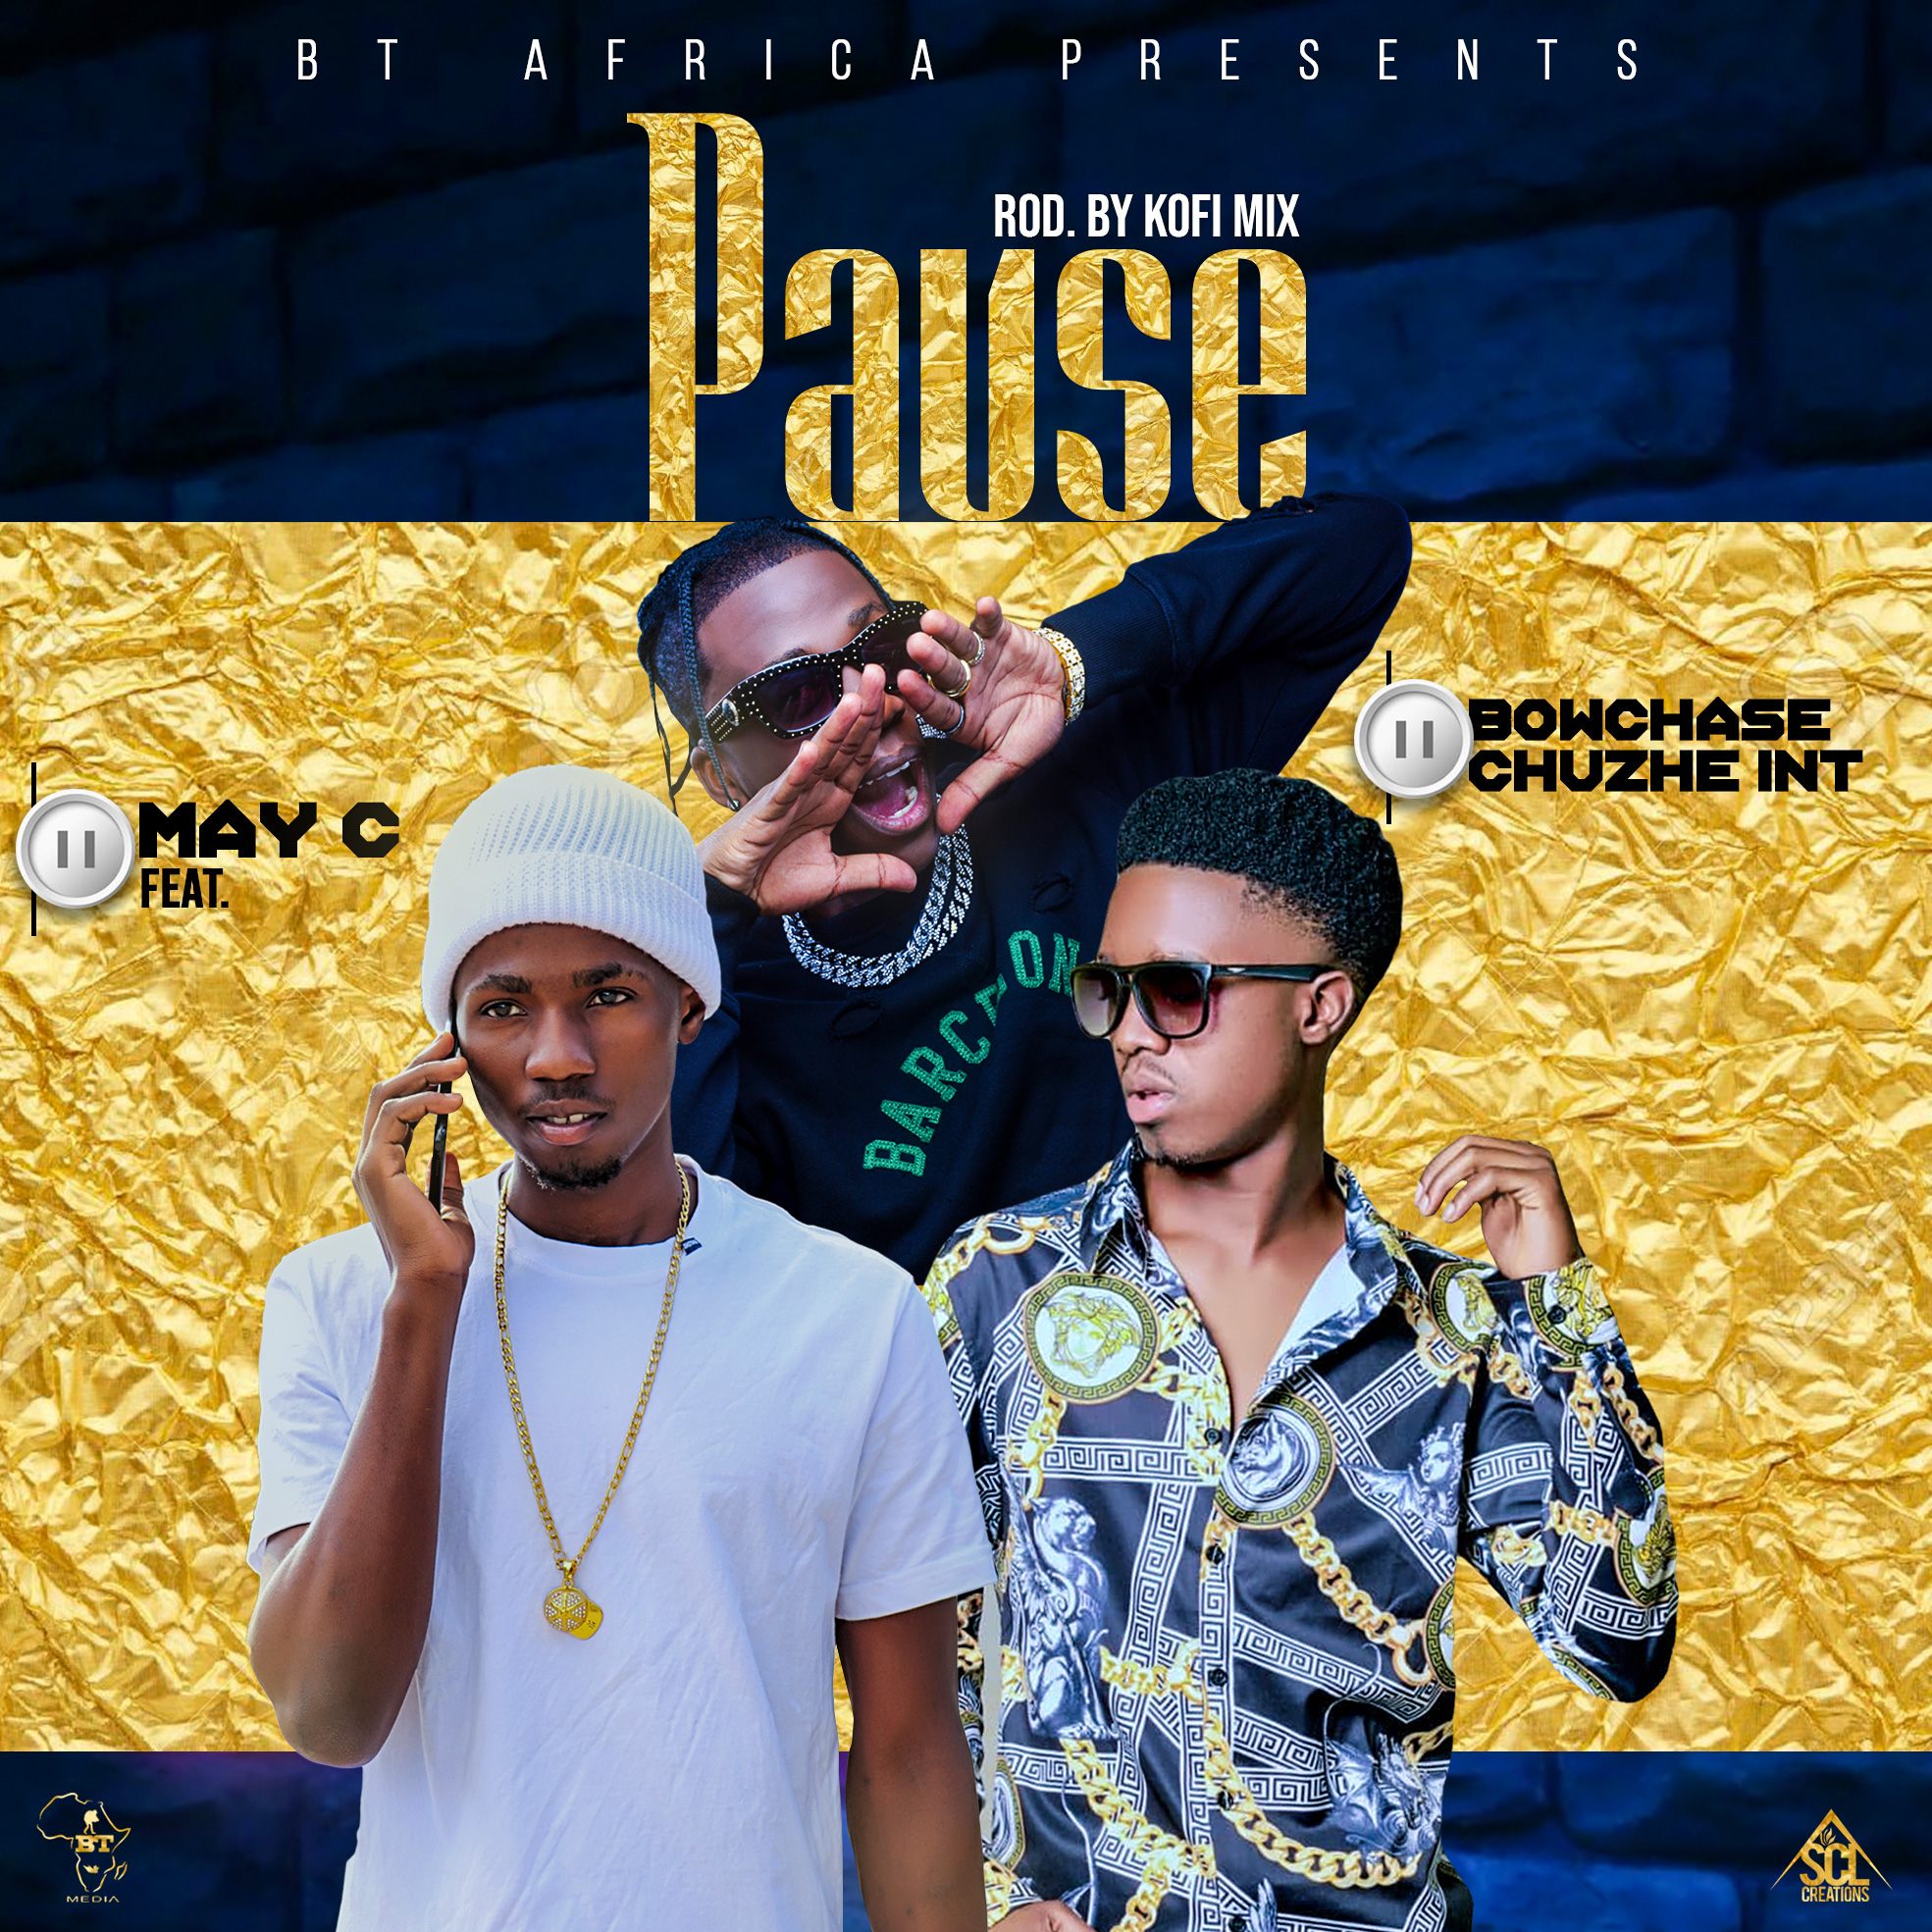 Pause (Ft Chuzhe Int, Bow Chase)